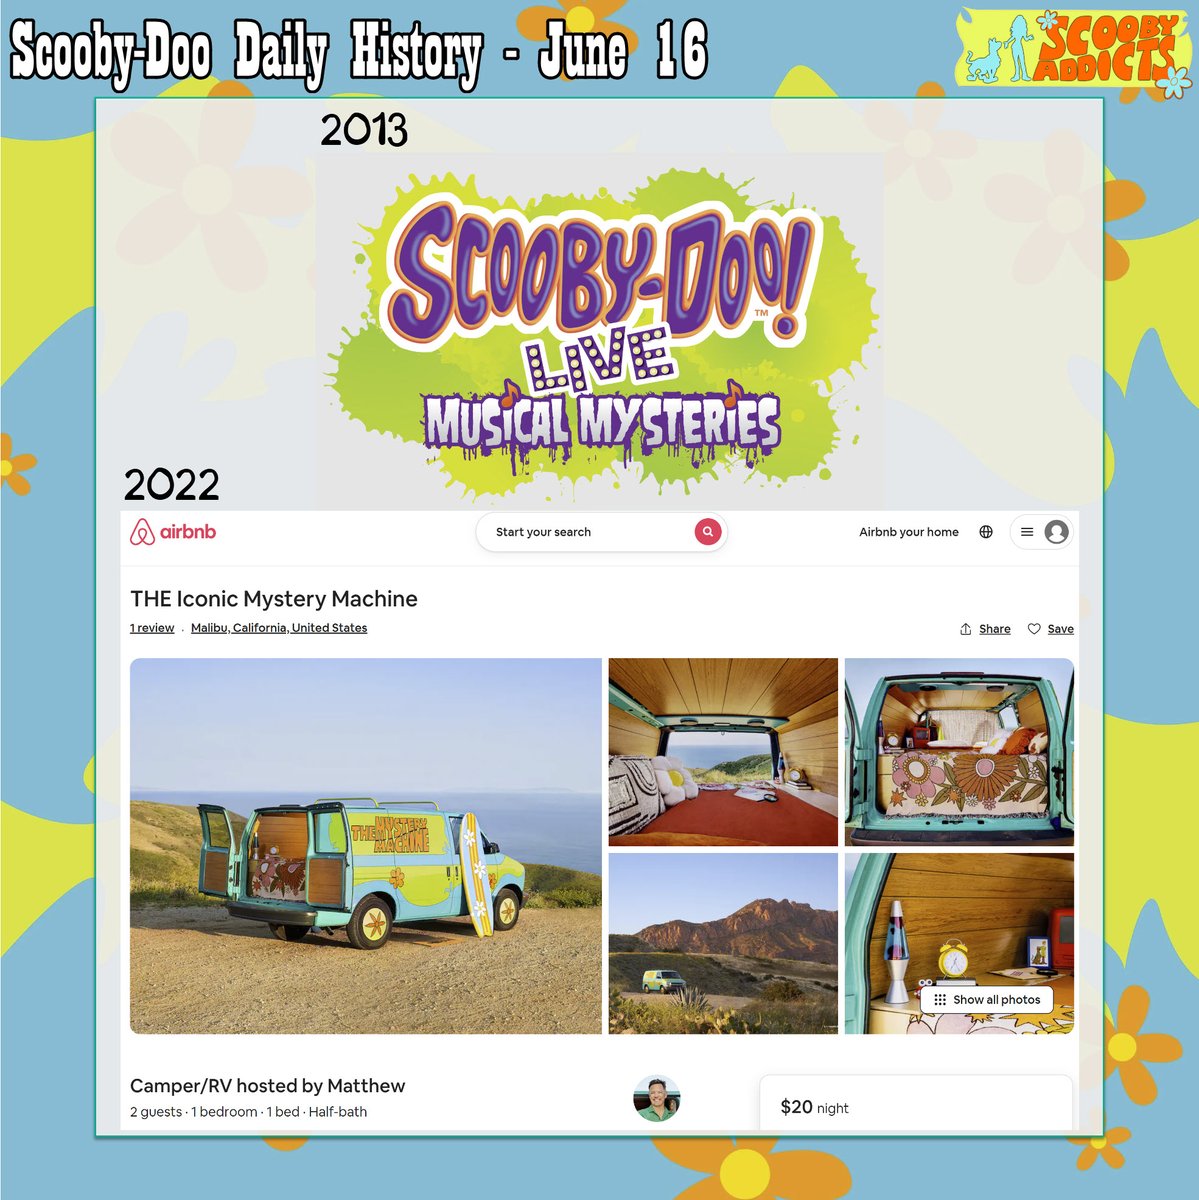 June 16 - #scoobydoohistory 

2013 - Scooby-Doo Live! Musical Mysteries (Ft. Lauderdale)
2022 - Booking opened for the Mystery Machine Airbnb

#ScoobyDoo

scoobyaddicts.com